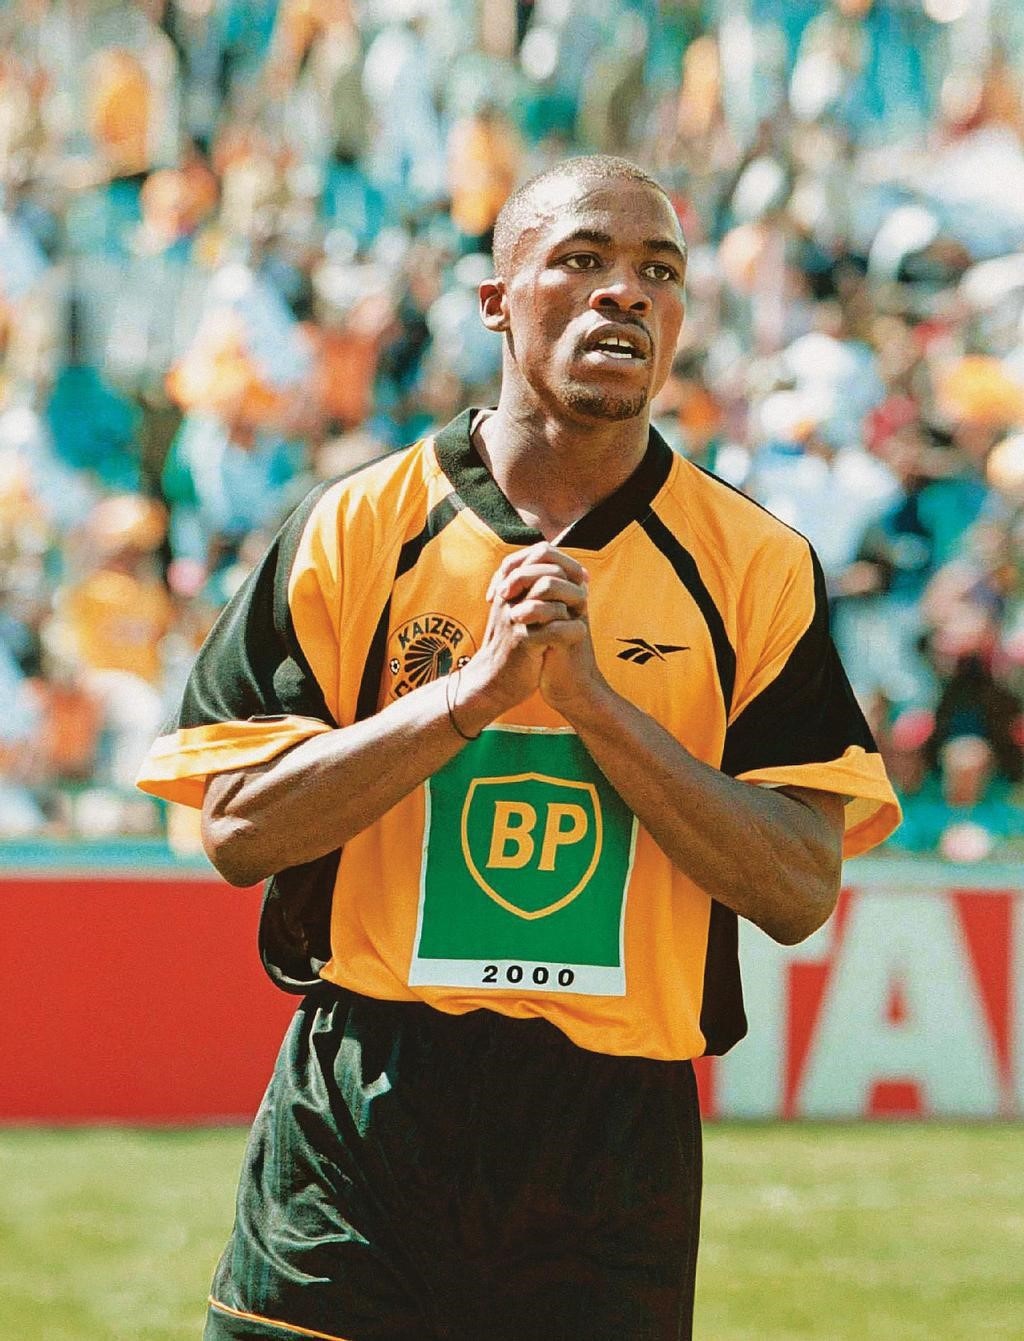 Robert Nauseb during his time at Kaizer Chiefs where he played as a right-wingback